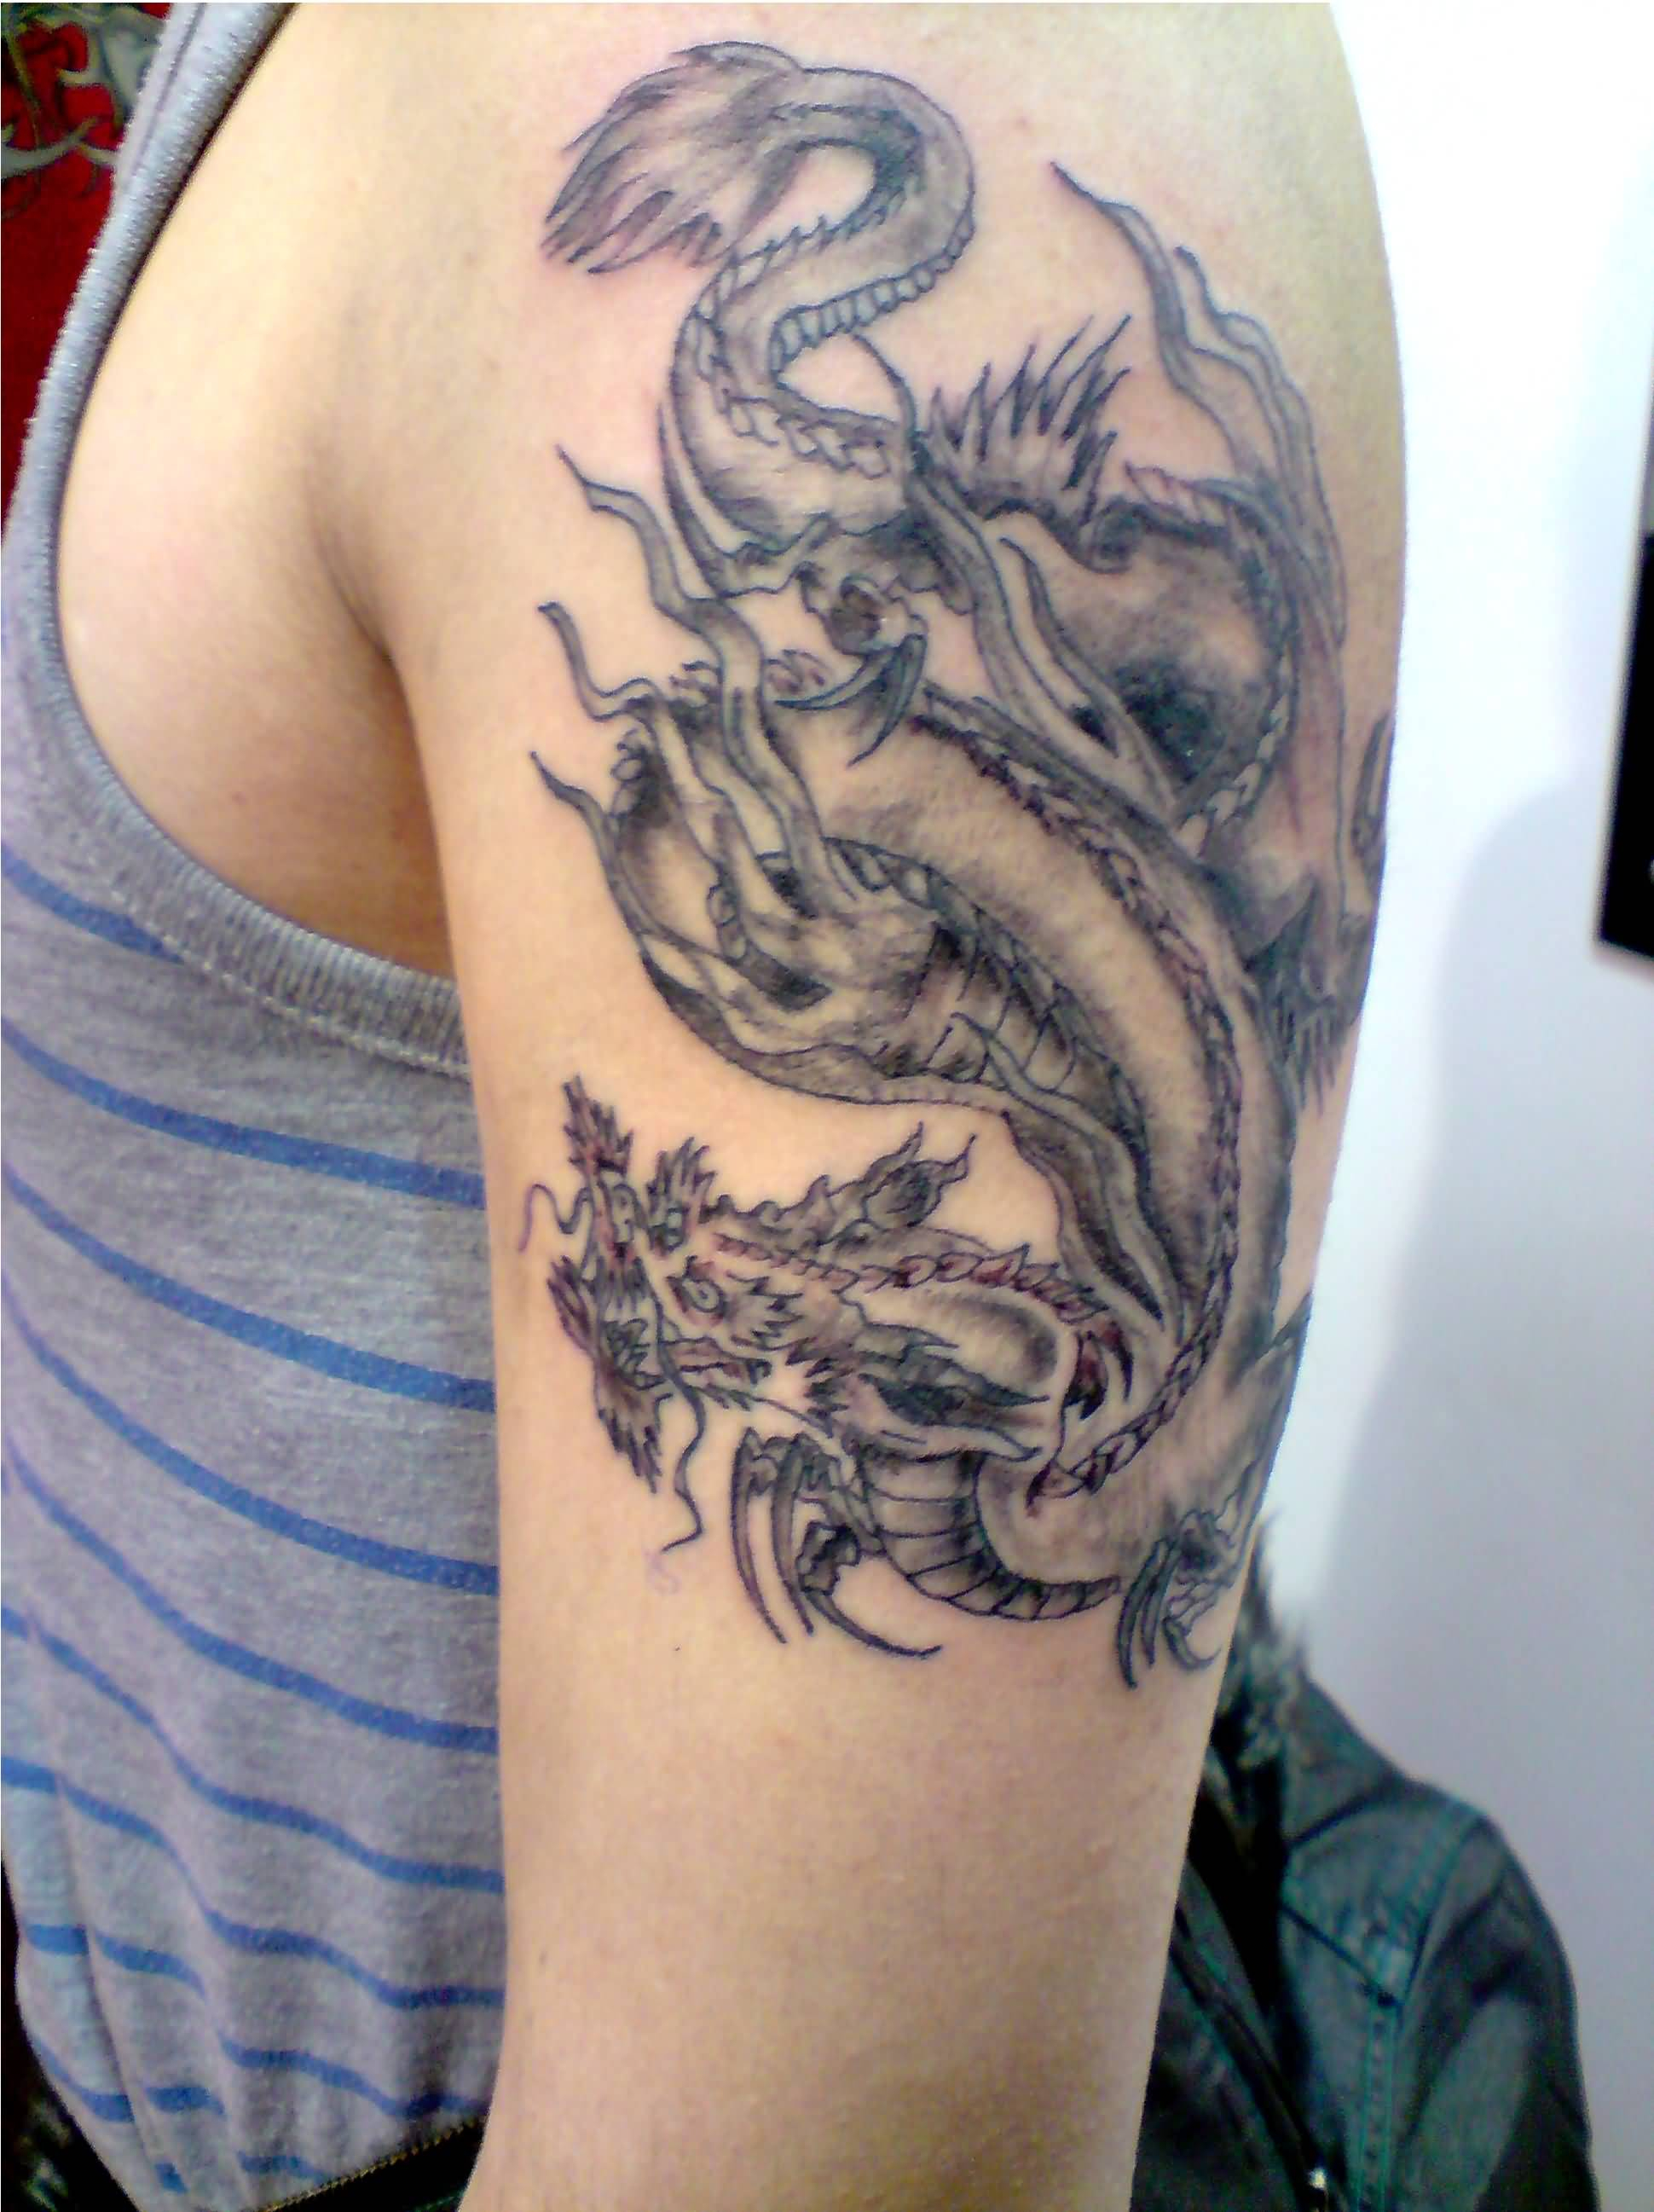 33 Amazing Chinese Dragon Tattoos Ideas intended for size 1940 X 2594